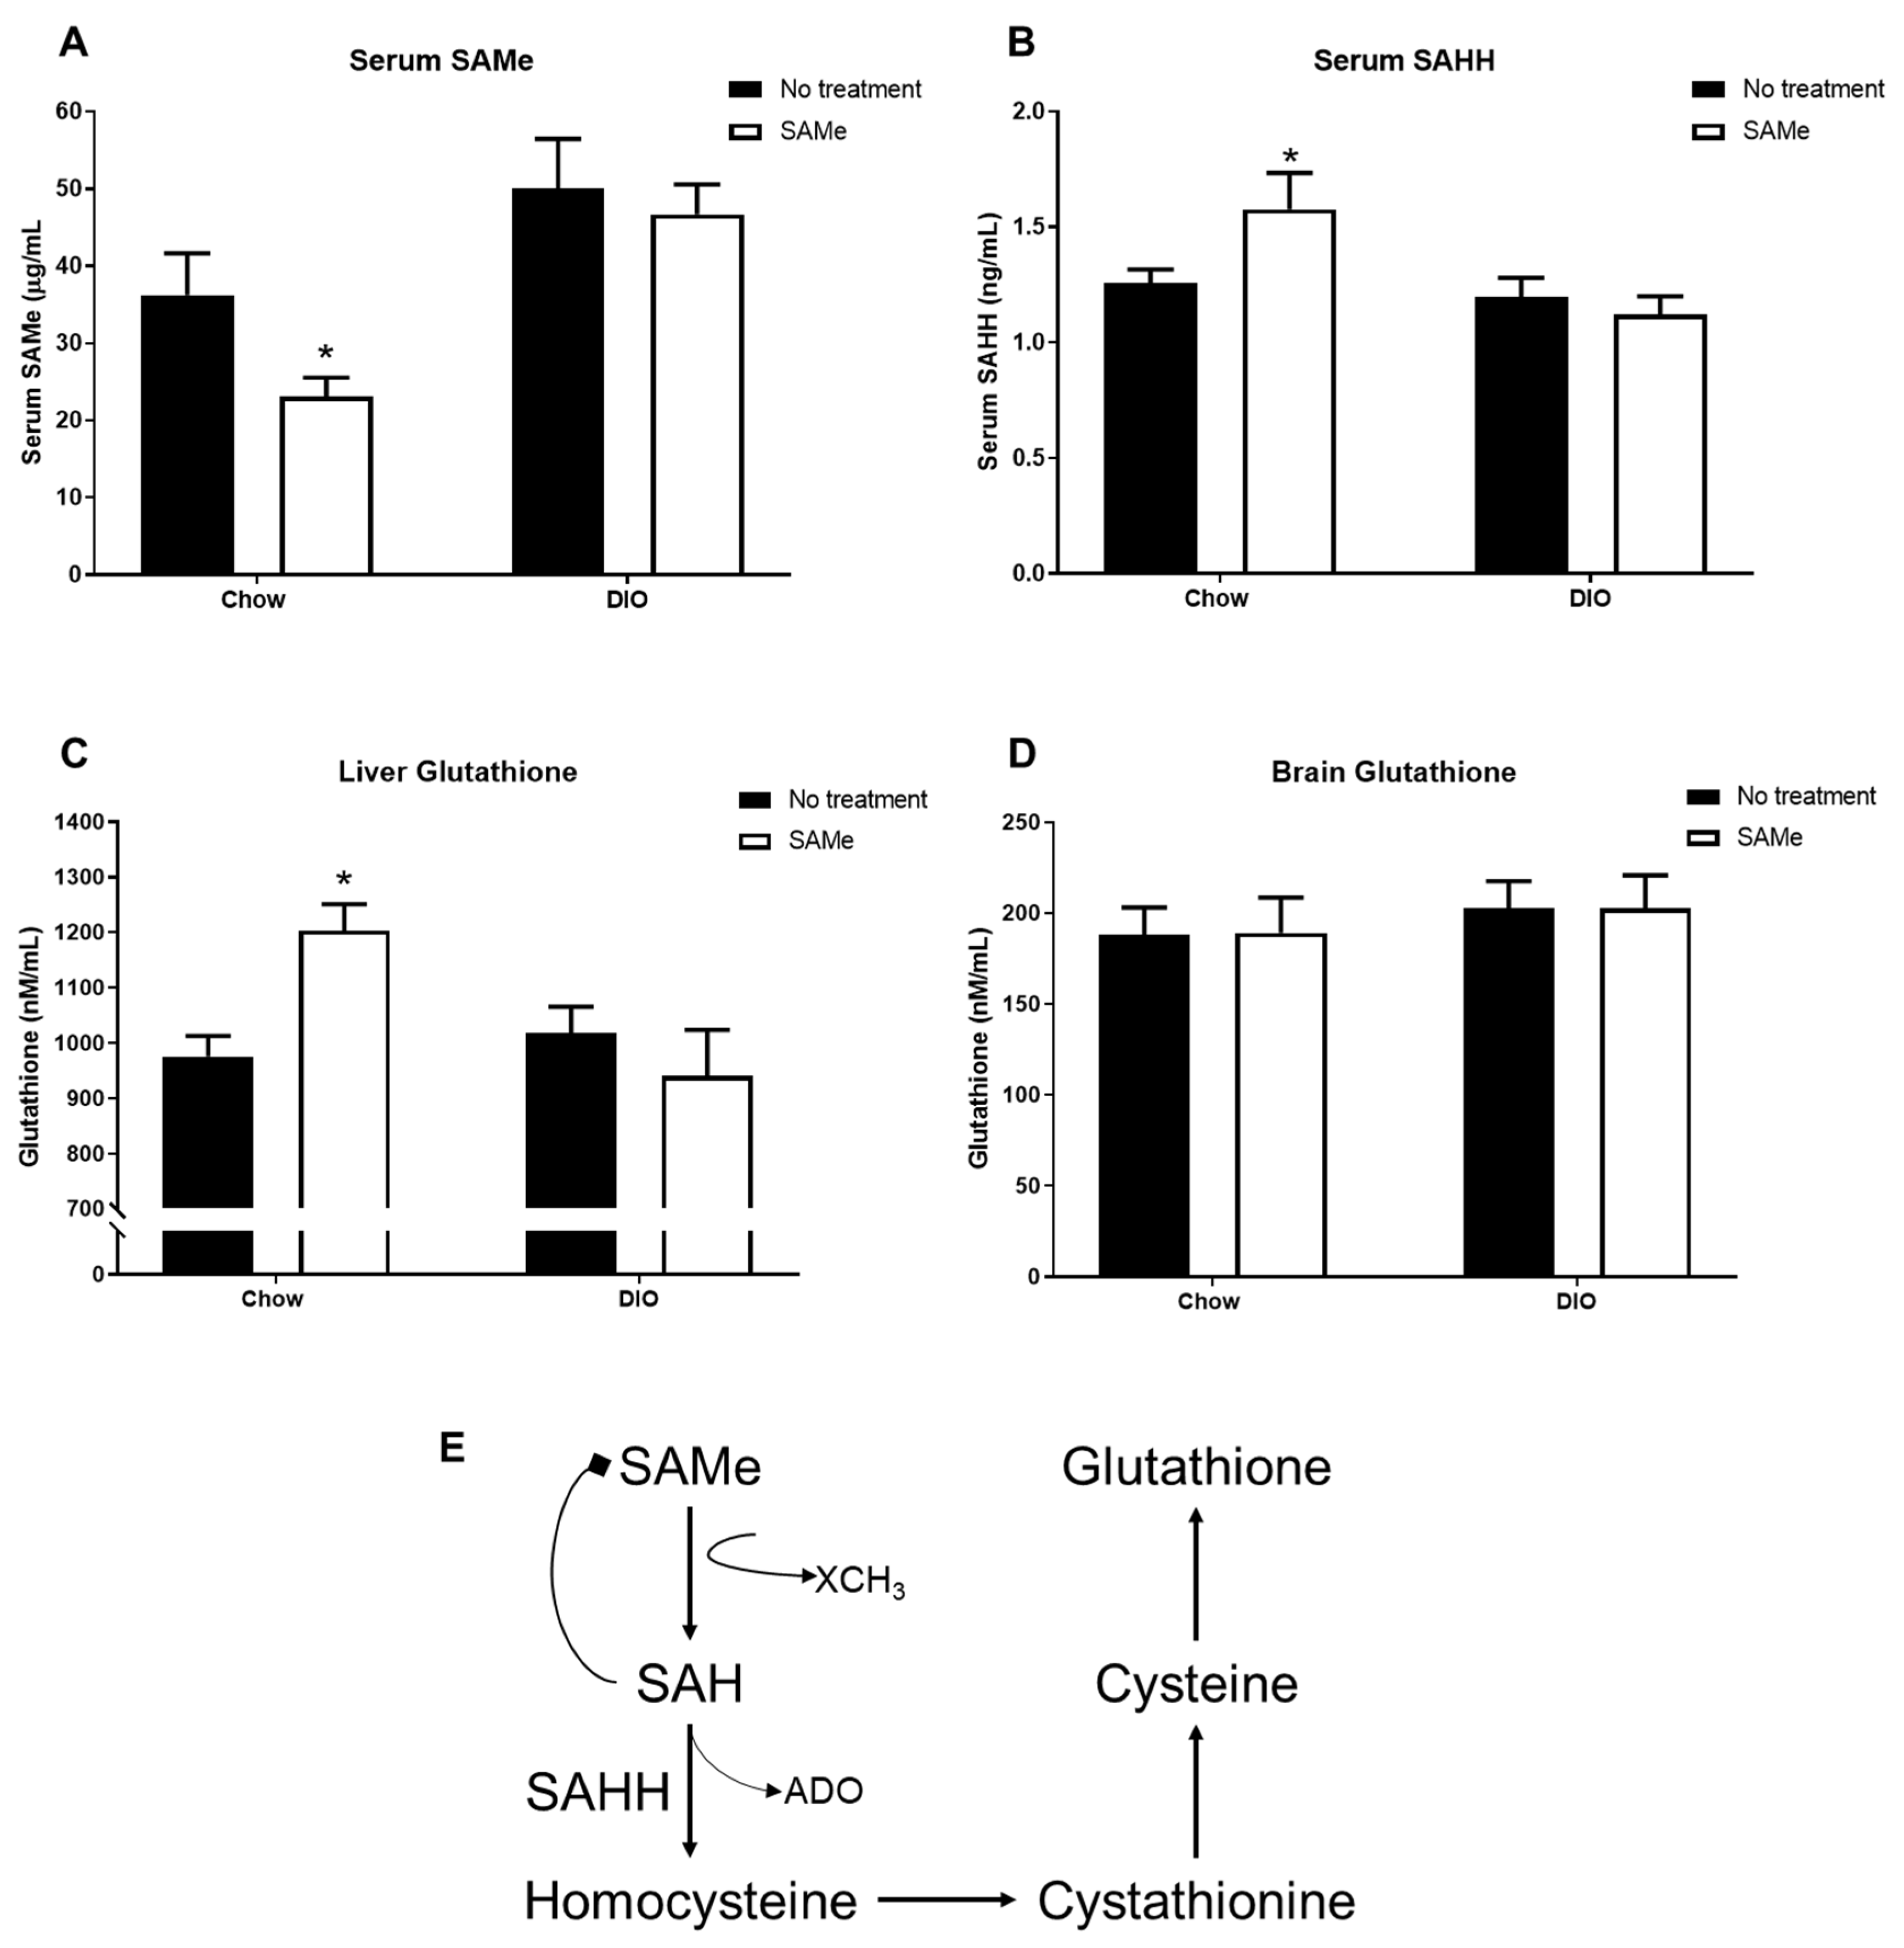 Nutrients | Free Full-Text | Obesity Prevents S-Adenosylmethionine-Mediated  Improvements in Age-Related Peripheral and Hippocampal Outcomes